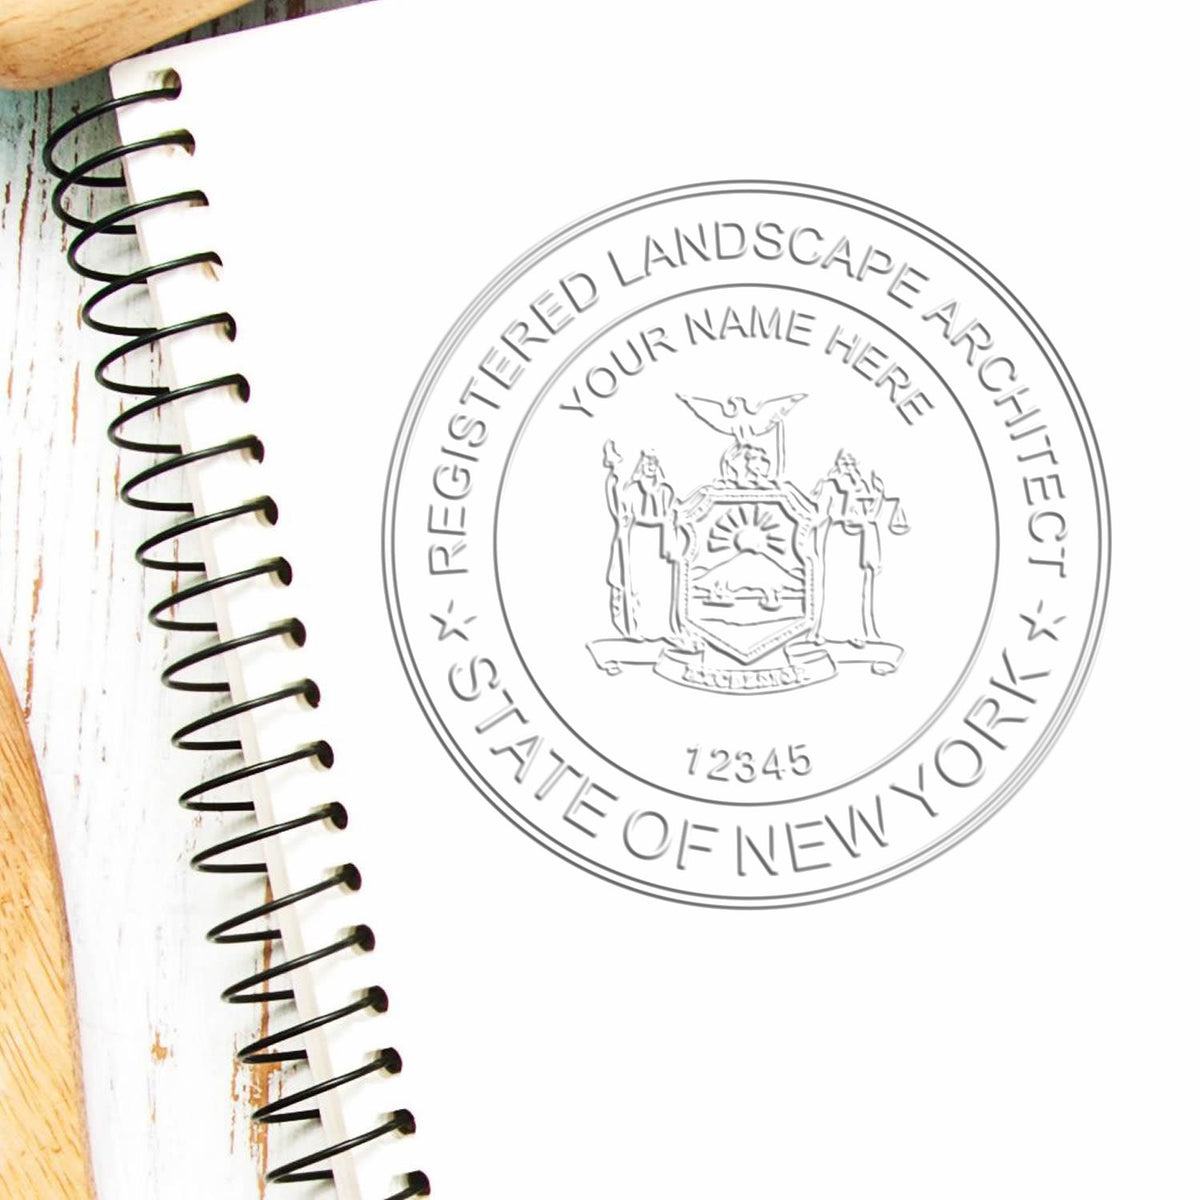 A stamped imprint of the Gift New York Landscape Architect Seal in this stylish lifestyle photo, setting the tone for a unique and personalized product.